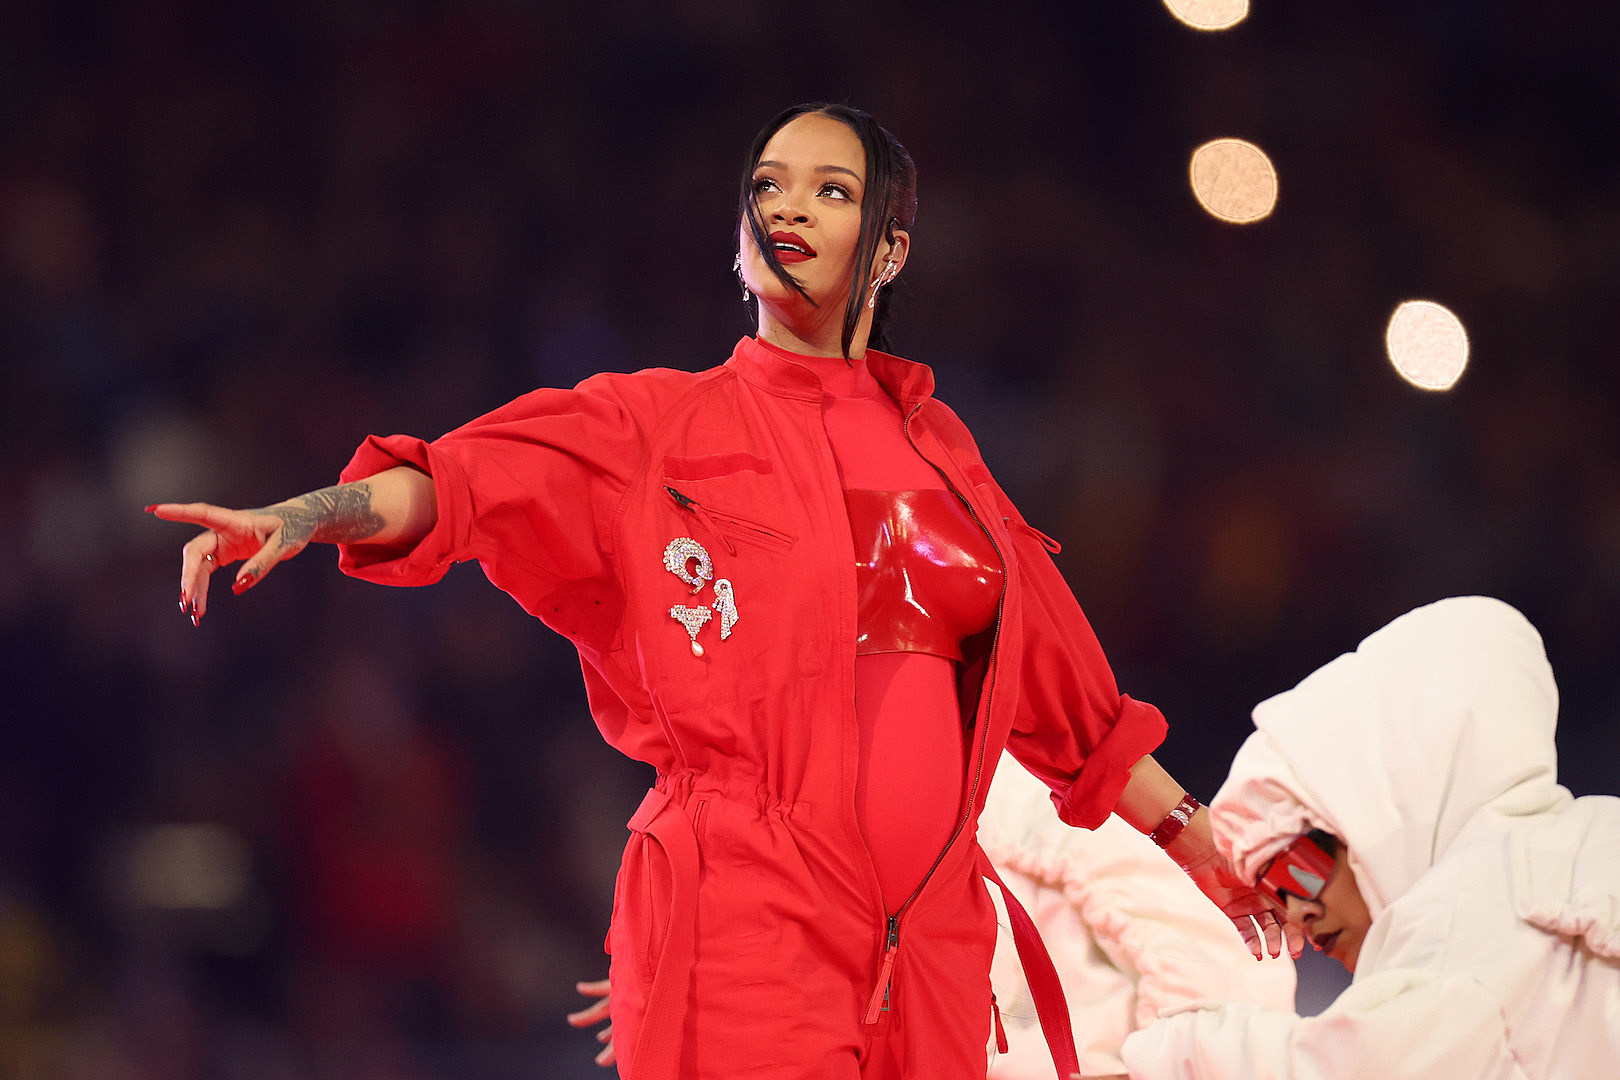 Searches for red jumpsuits increased by 620% after Rihanna's performance